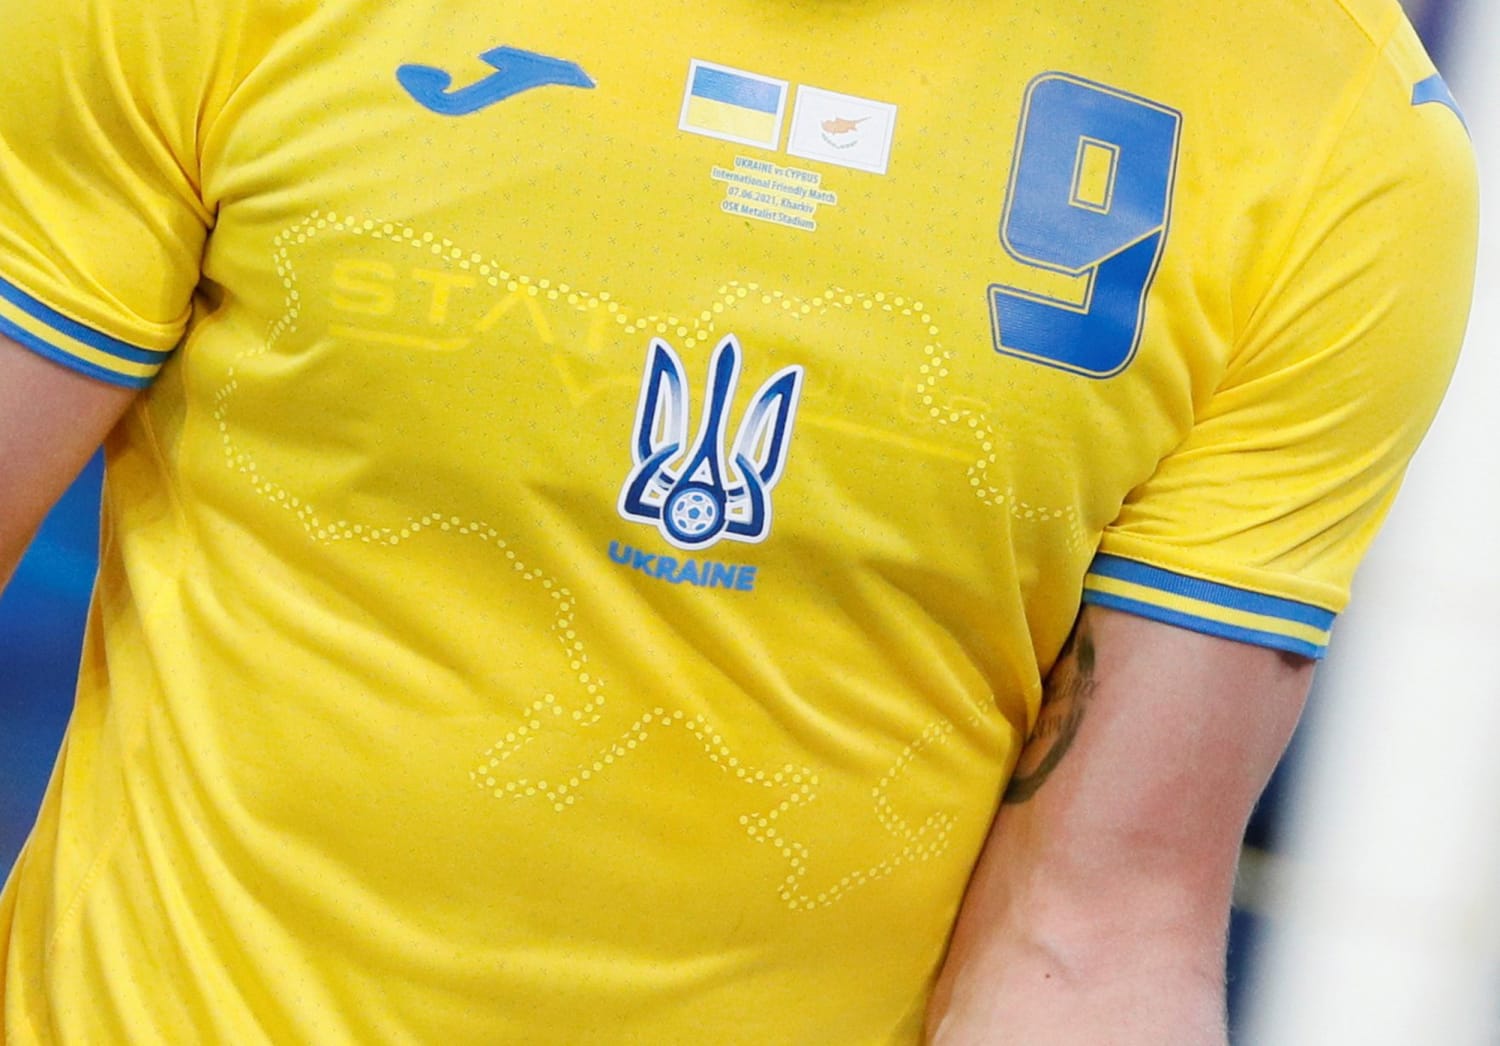 UEFA 2020: Ukraine told to remove 'political' slogan from soccer jersey  after Russia outrage